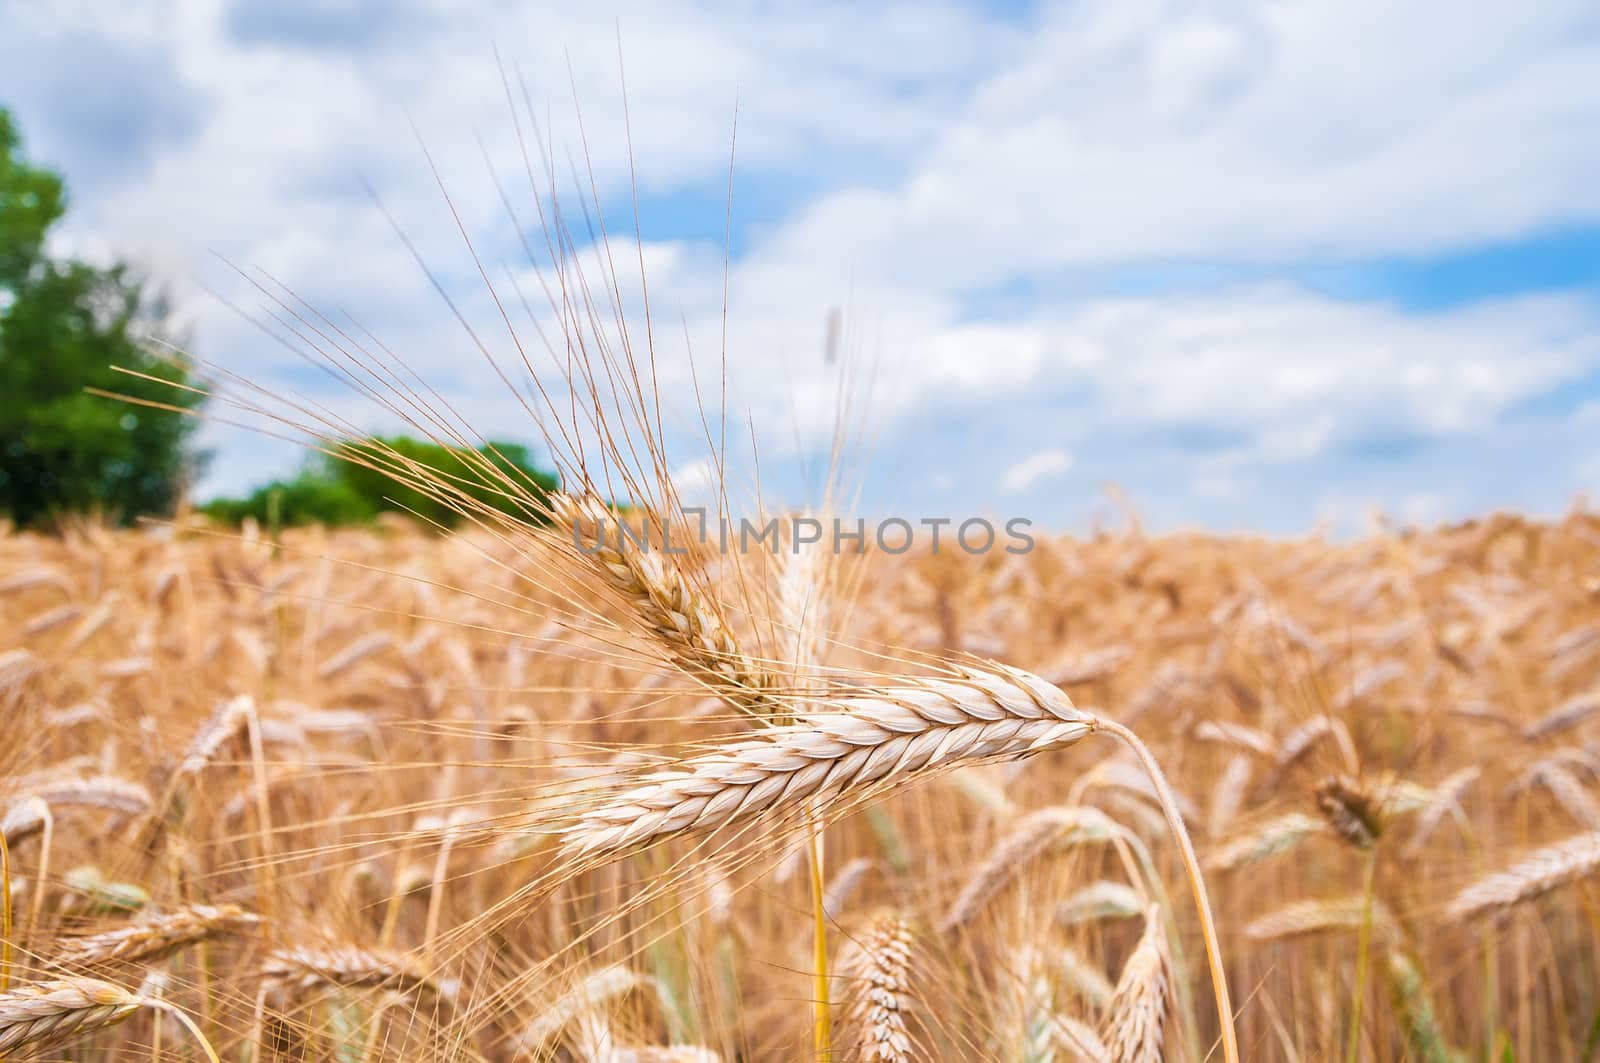 Close up of the natural wheat ears growing on field